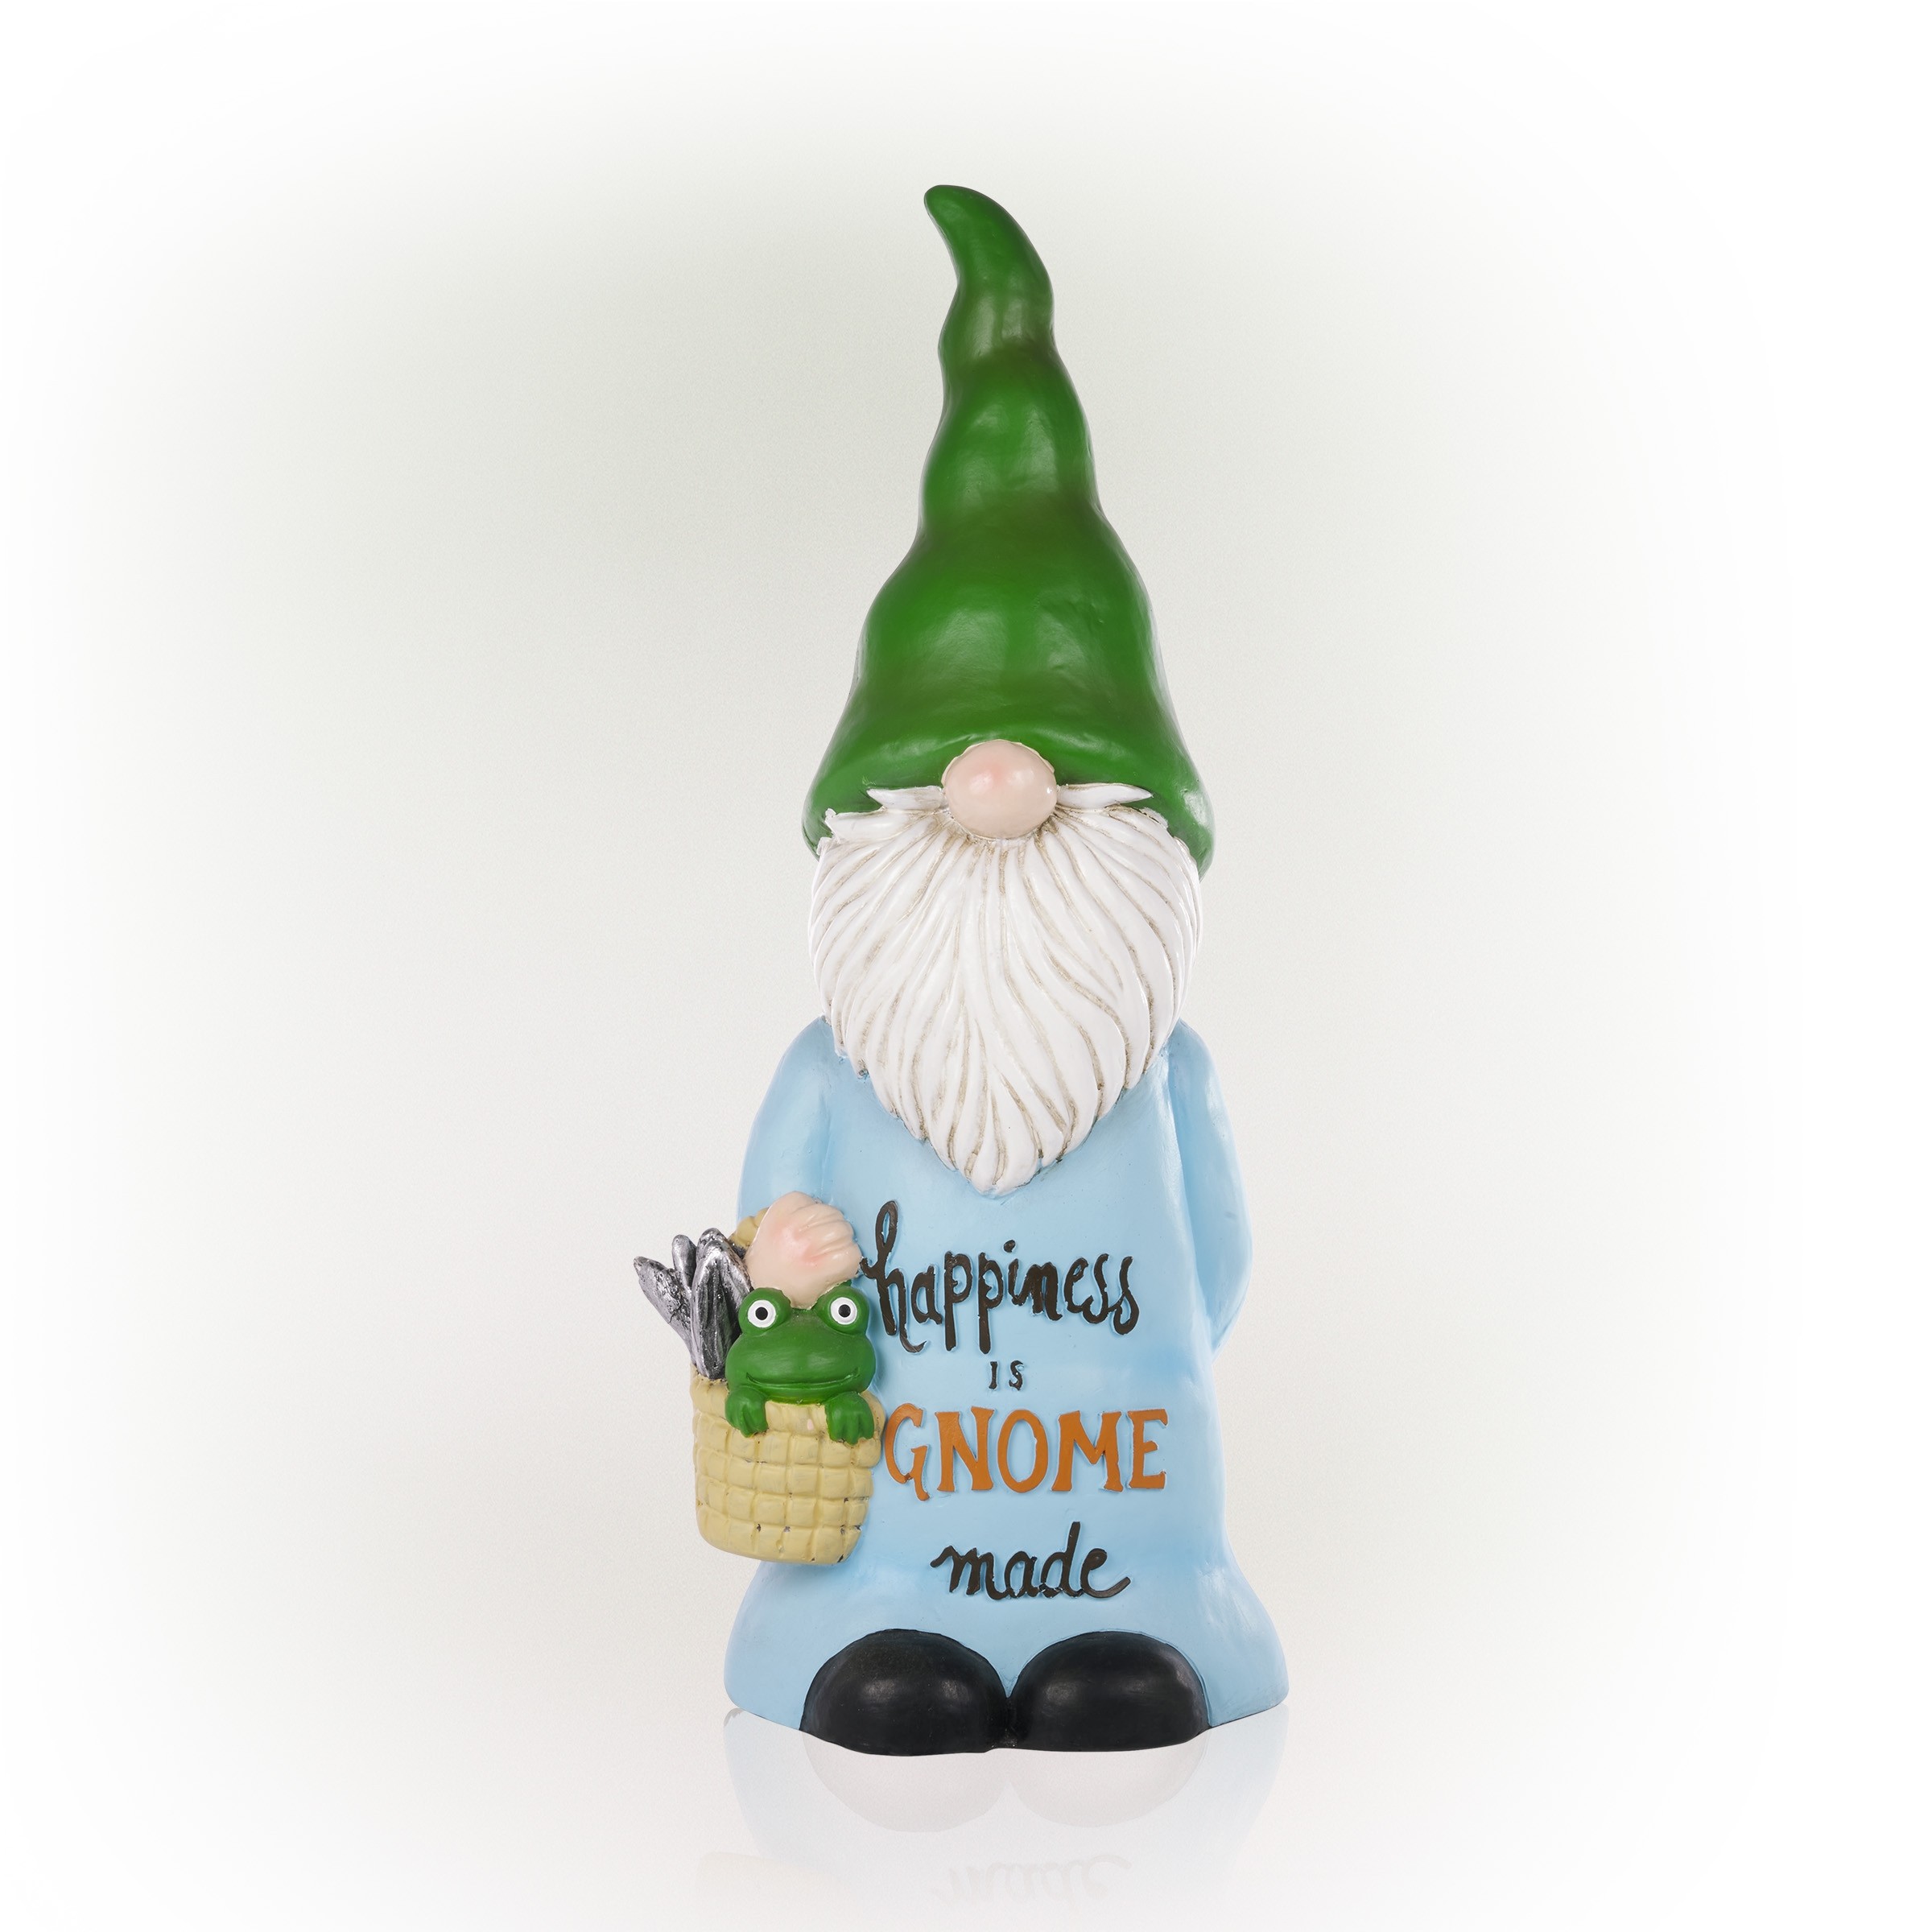 "Happiness is Gnome Made" Garden Gnome Statue